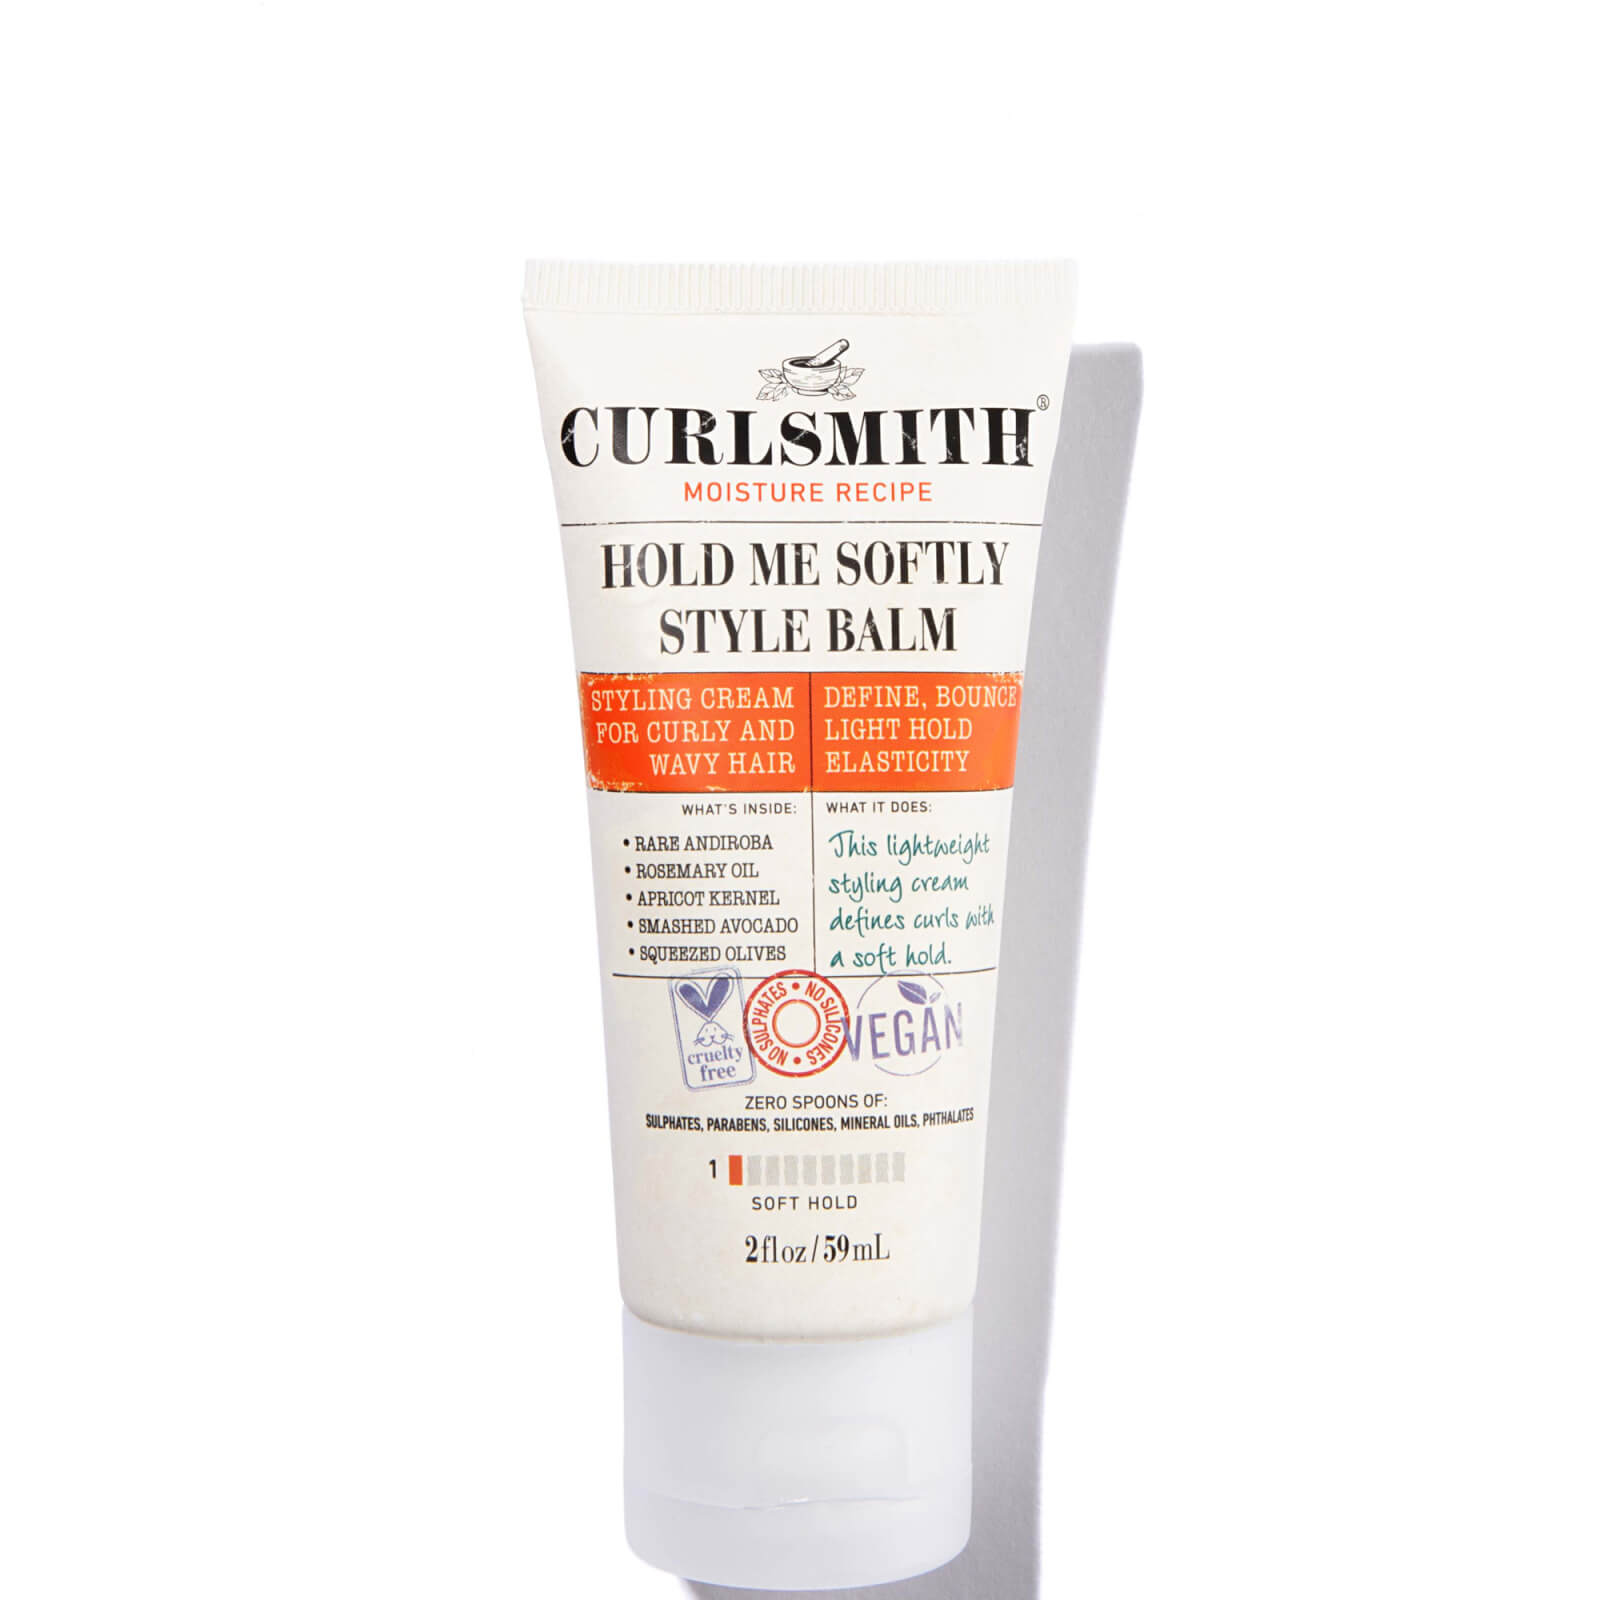 Image of Curlsmith Hold Me Softly Style Balm Travel Size 59ml